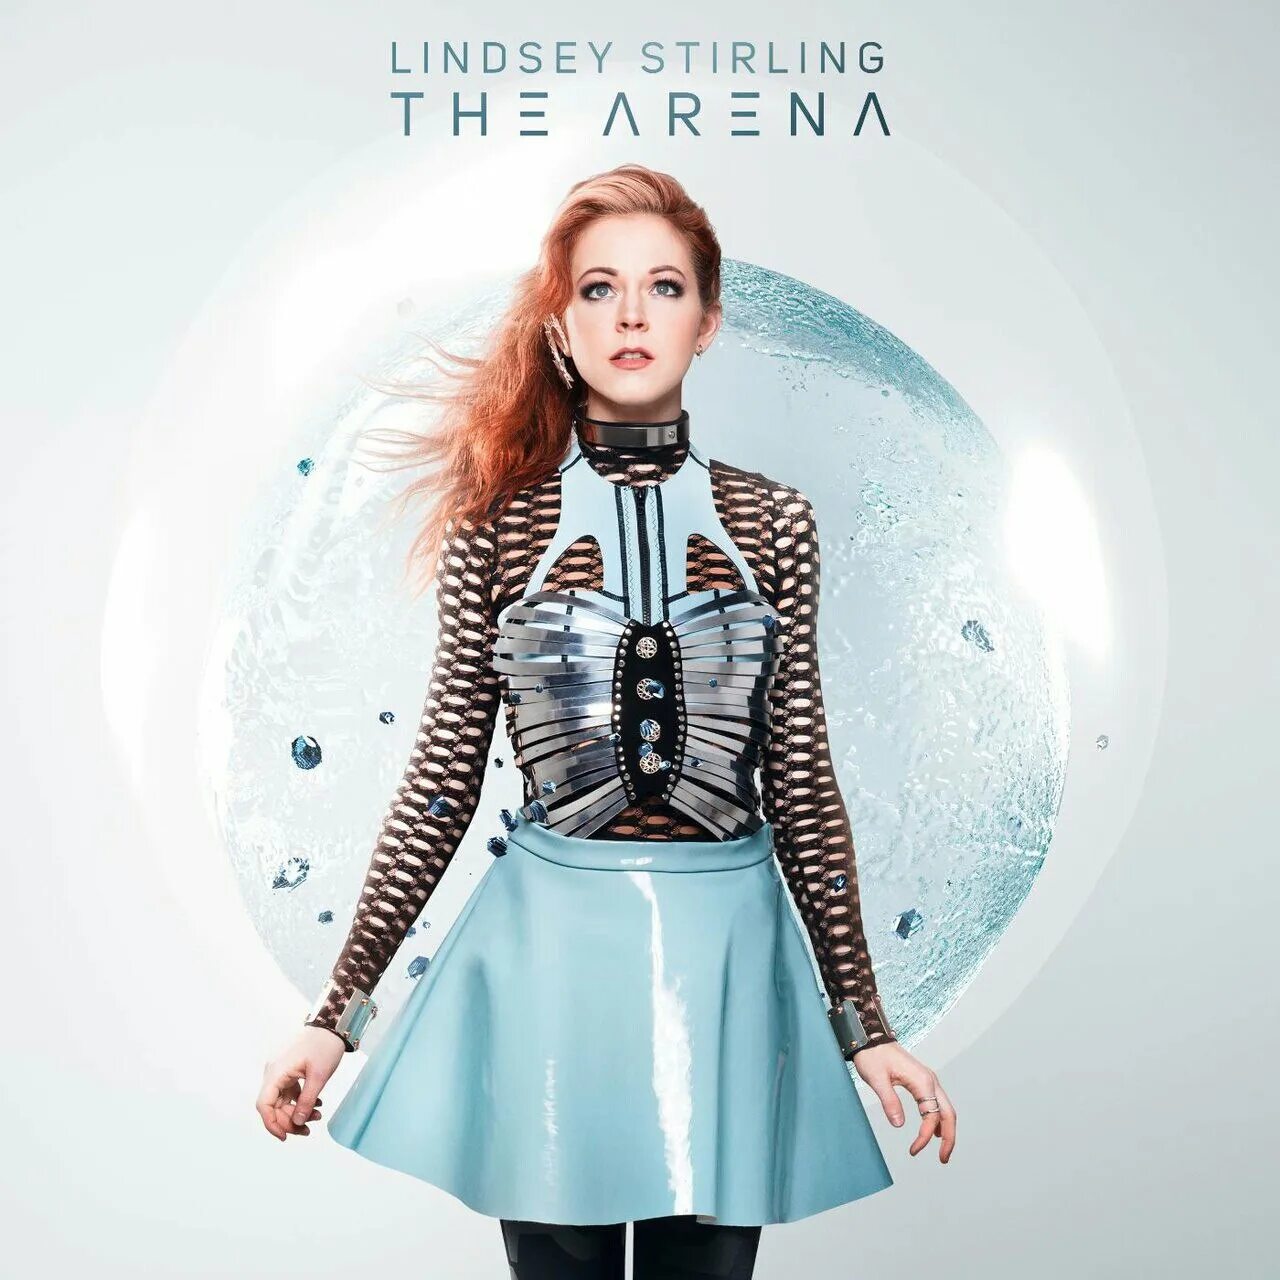 The arena lindsey